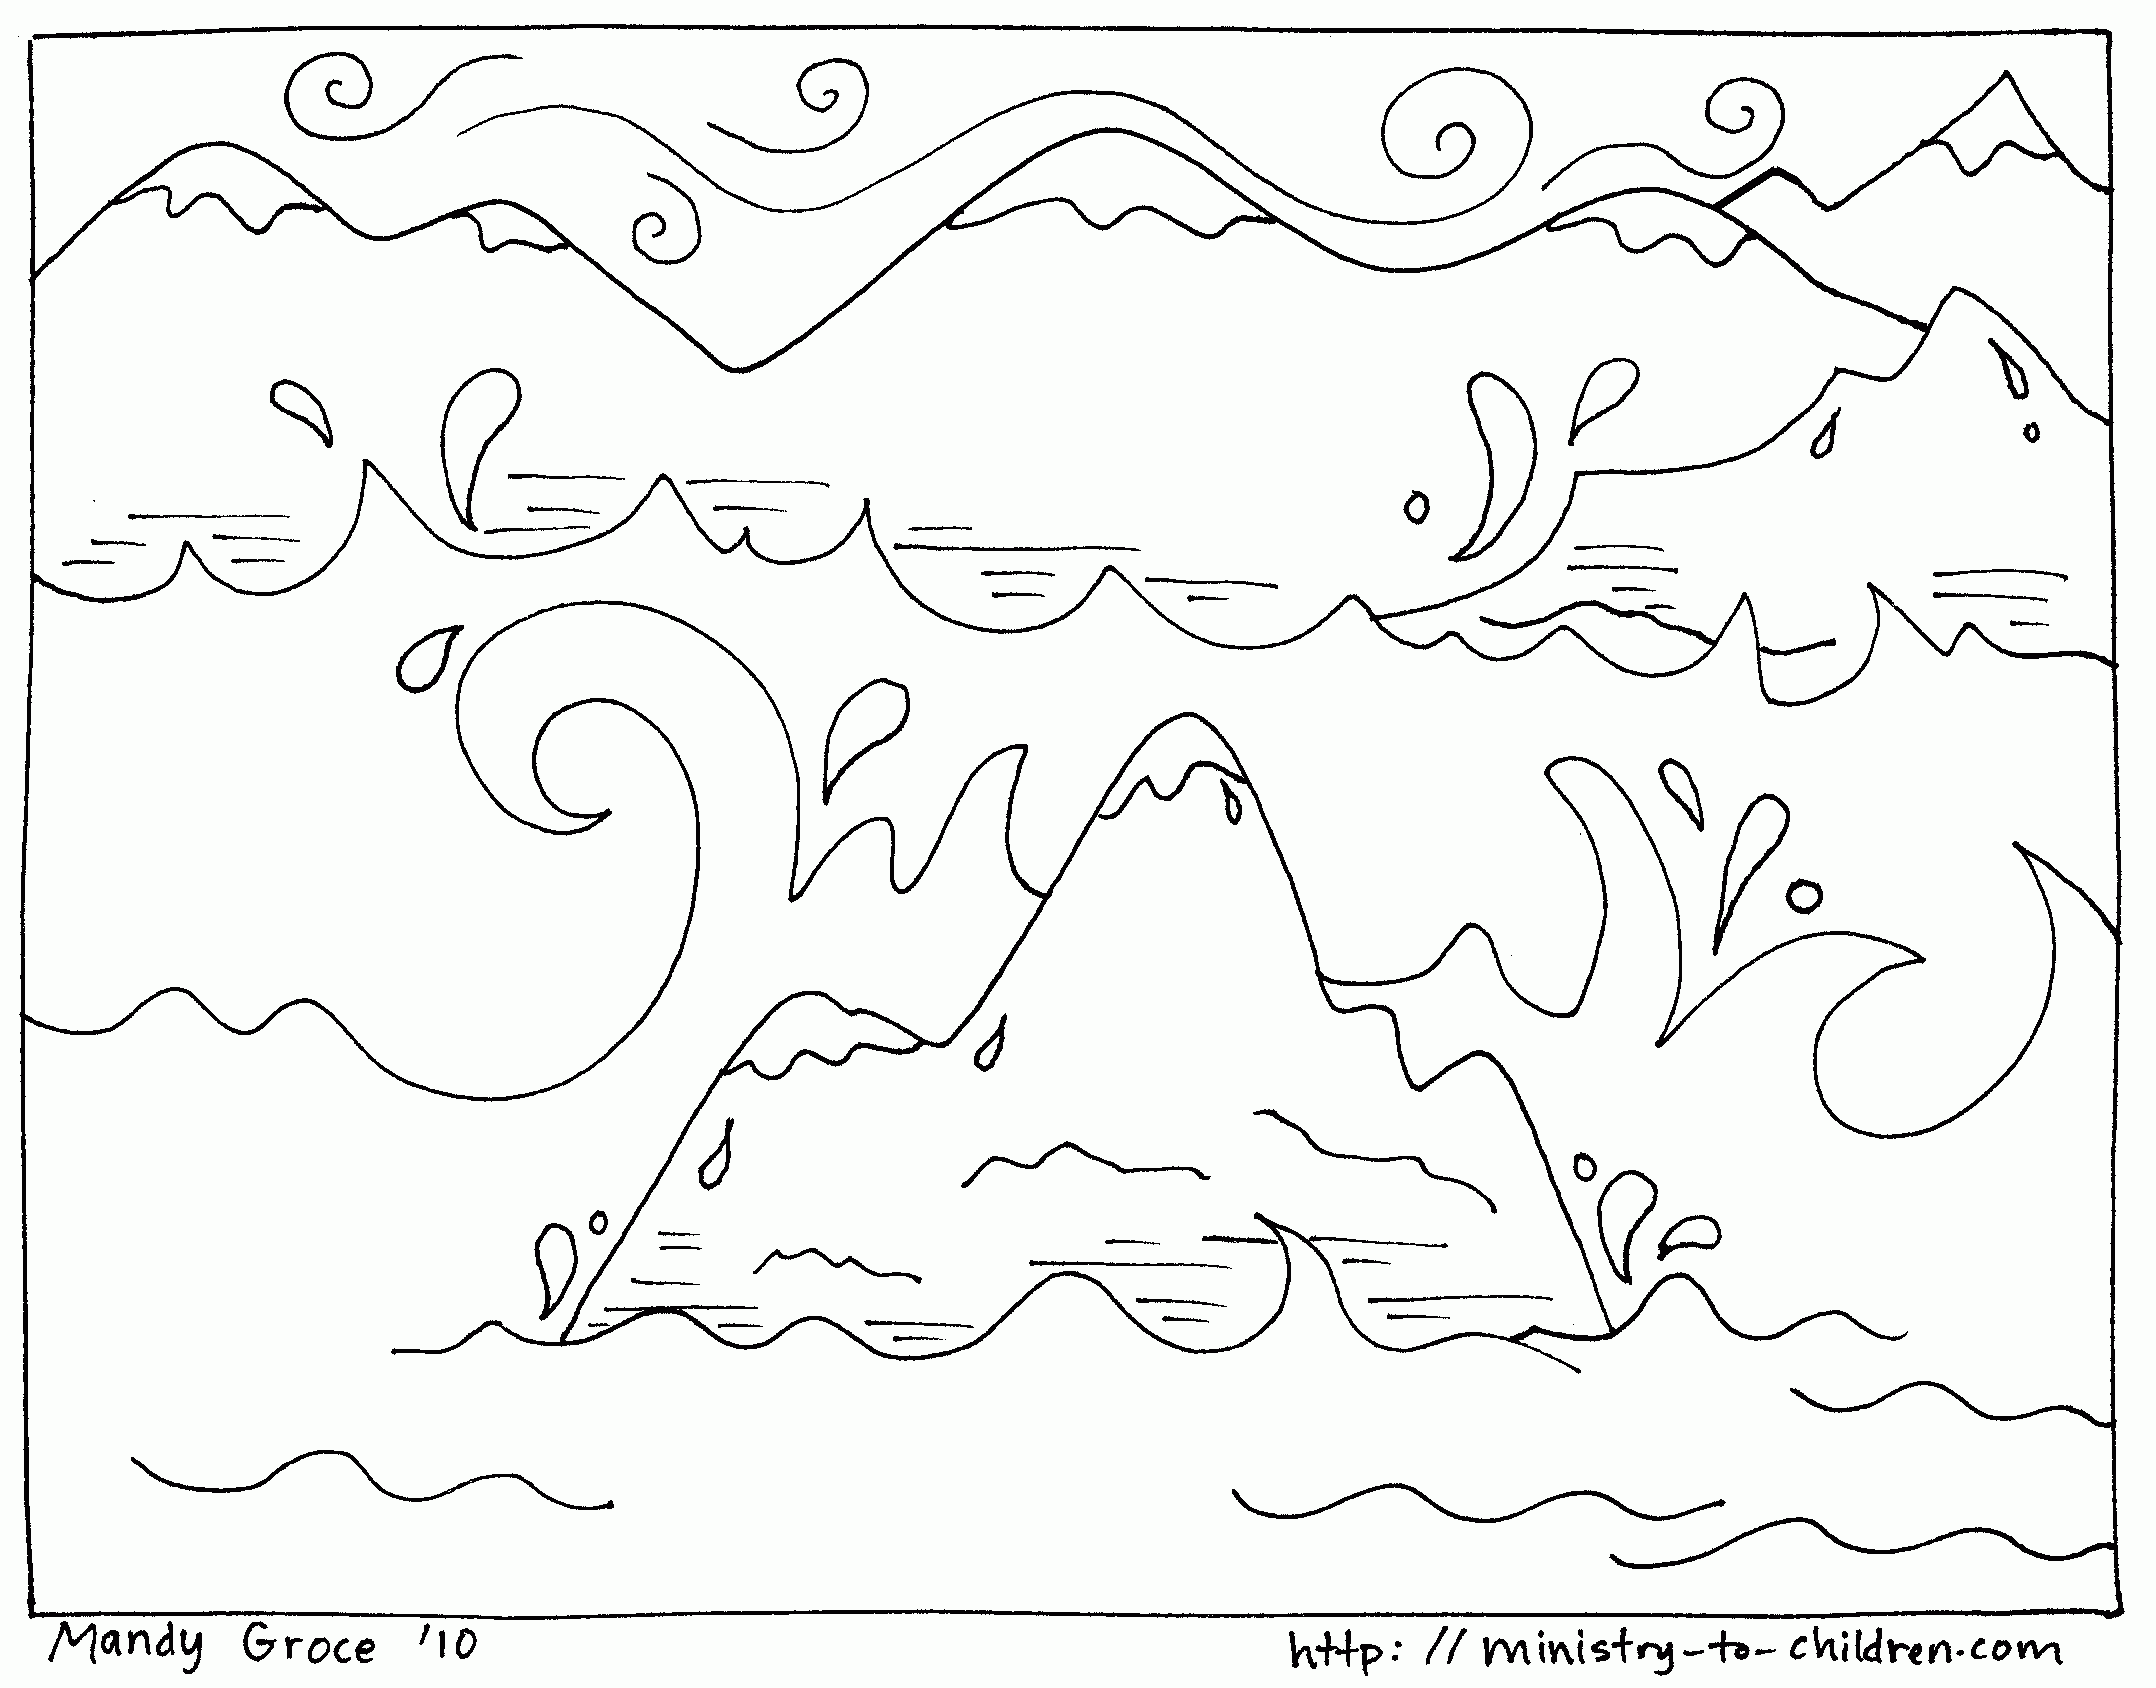 Creation Coloring Pages &quotGod Made the Land" Third Day